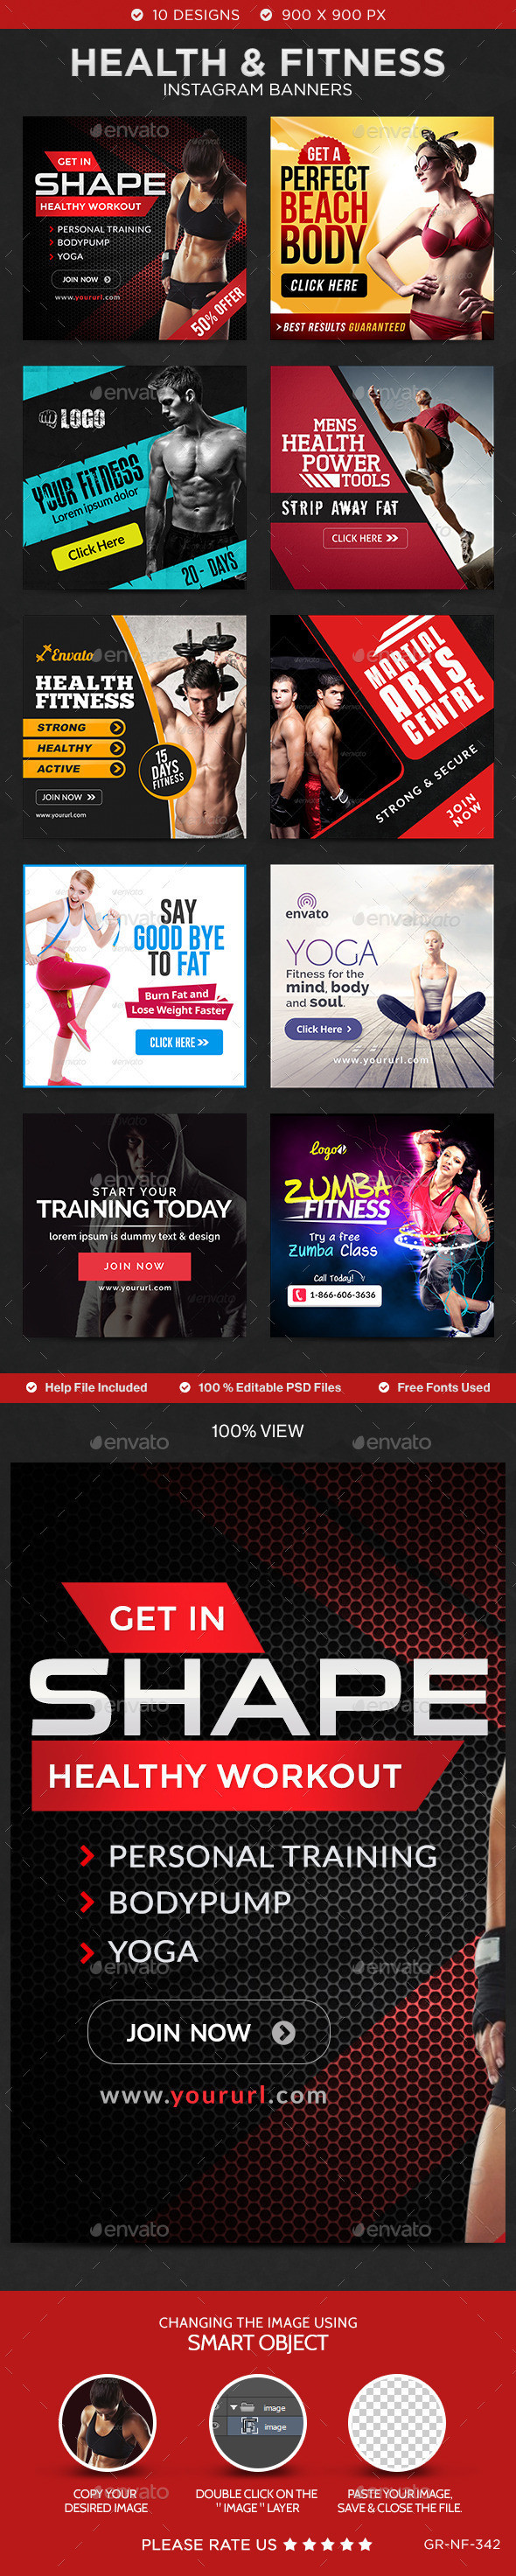 Nf 342 health 20  20fitness 20instagram 20templates preview